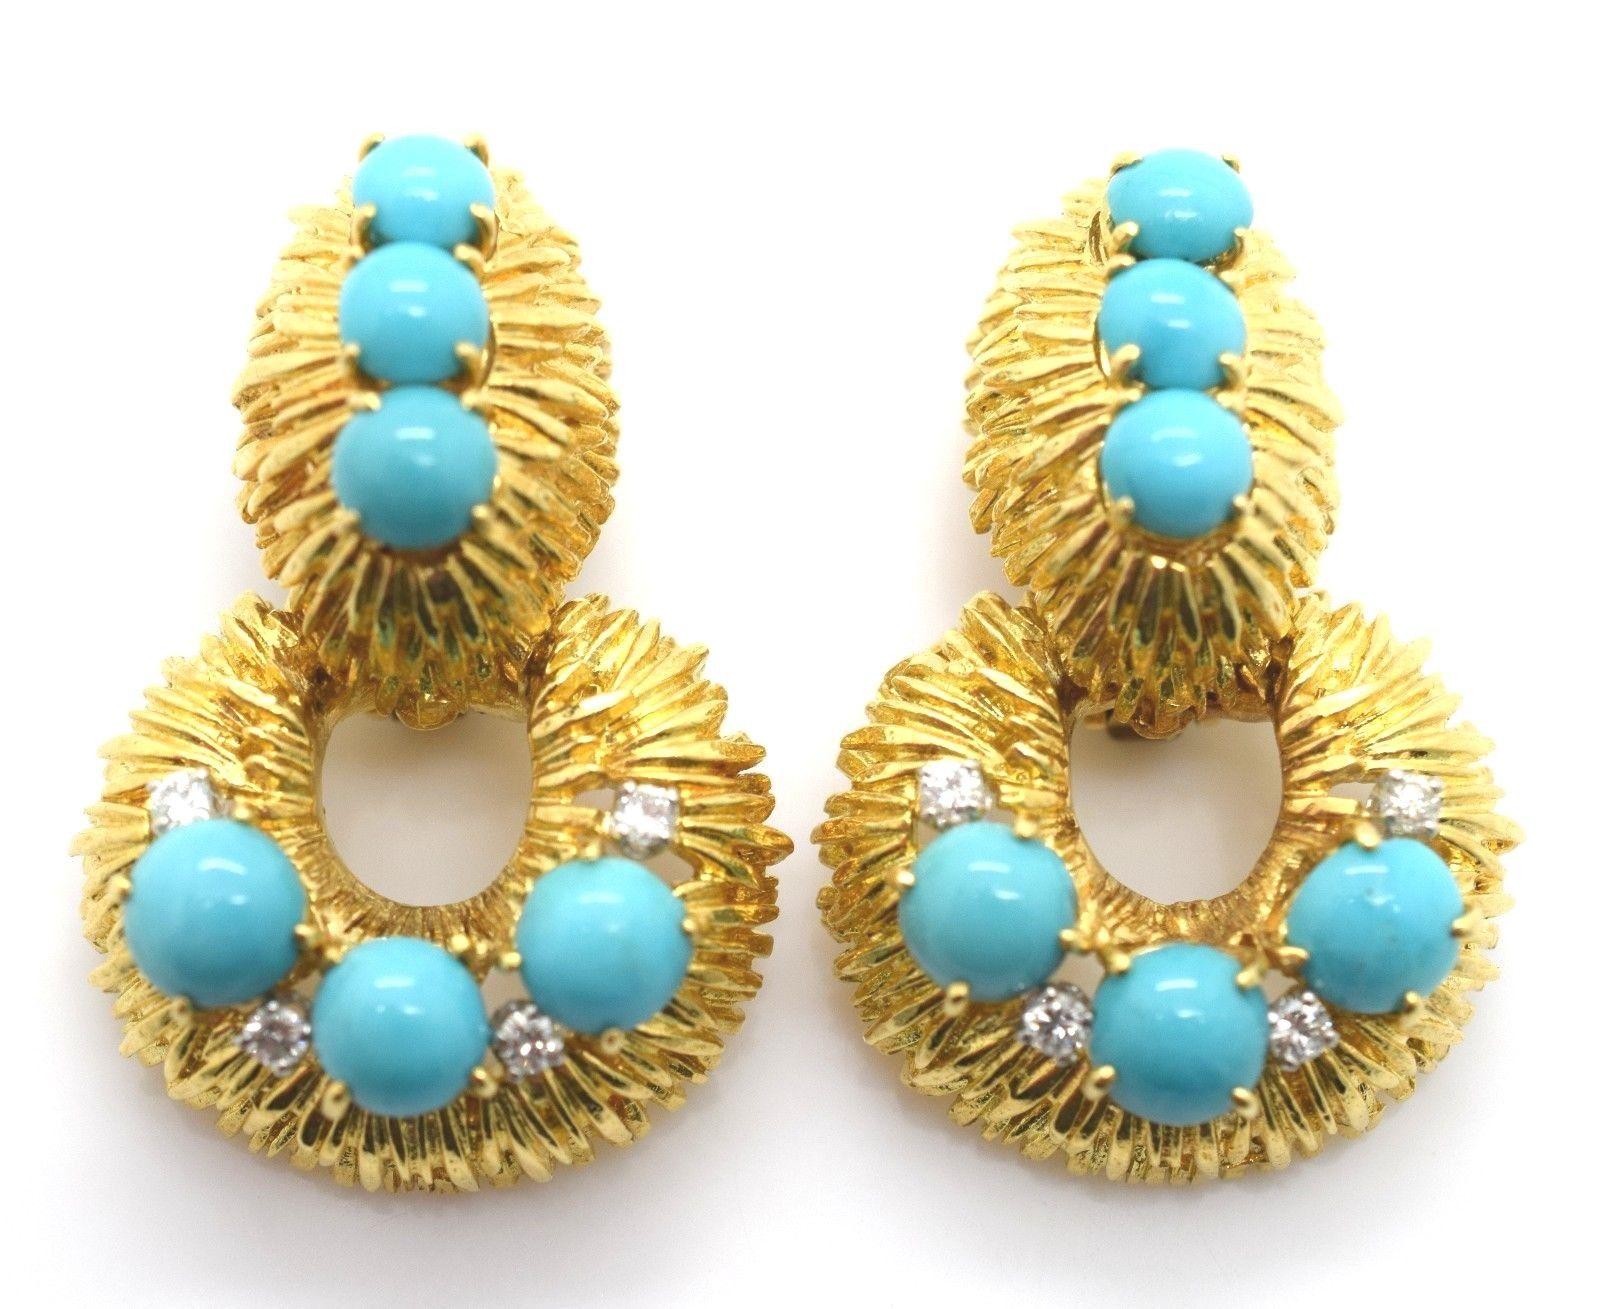 A beautiful pair of famed designer David Webb Door Knocker Earrings. The earrings are set with amazing natural Turquoise cabochons 12 stones in total on the pair. Four Diamonds on each earring. The textured design of the gold is a one of a kind